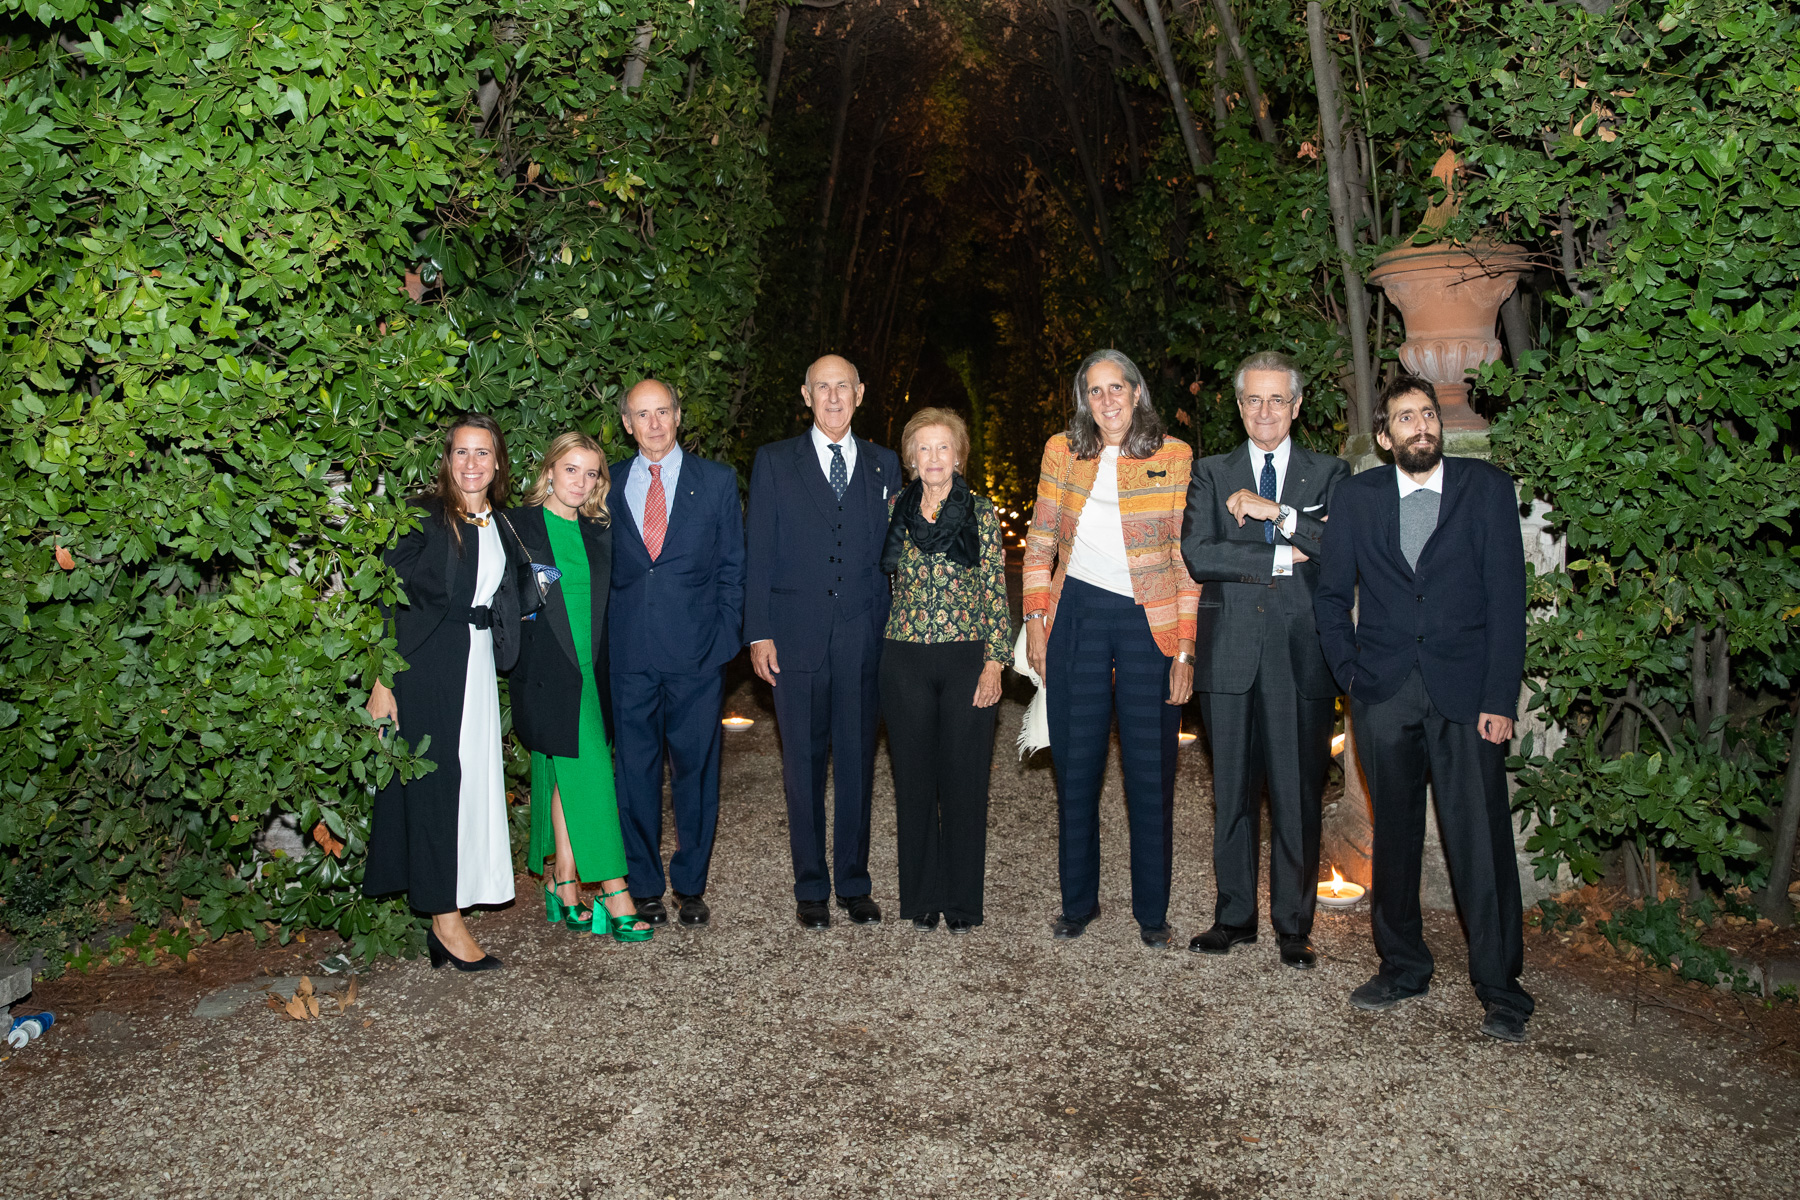 Joint Reception of the Embassies to the Holy See and to the Quirinale